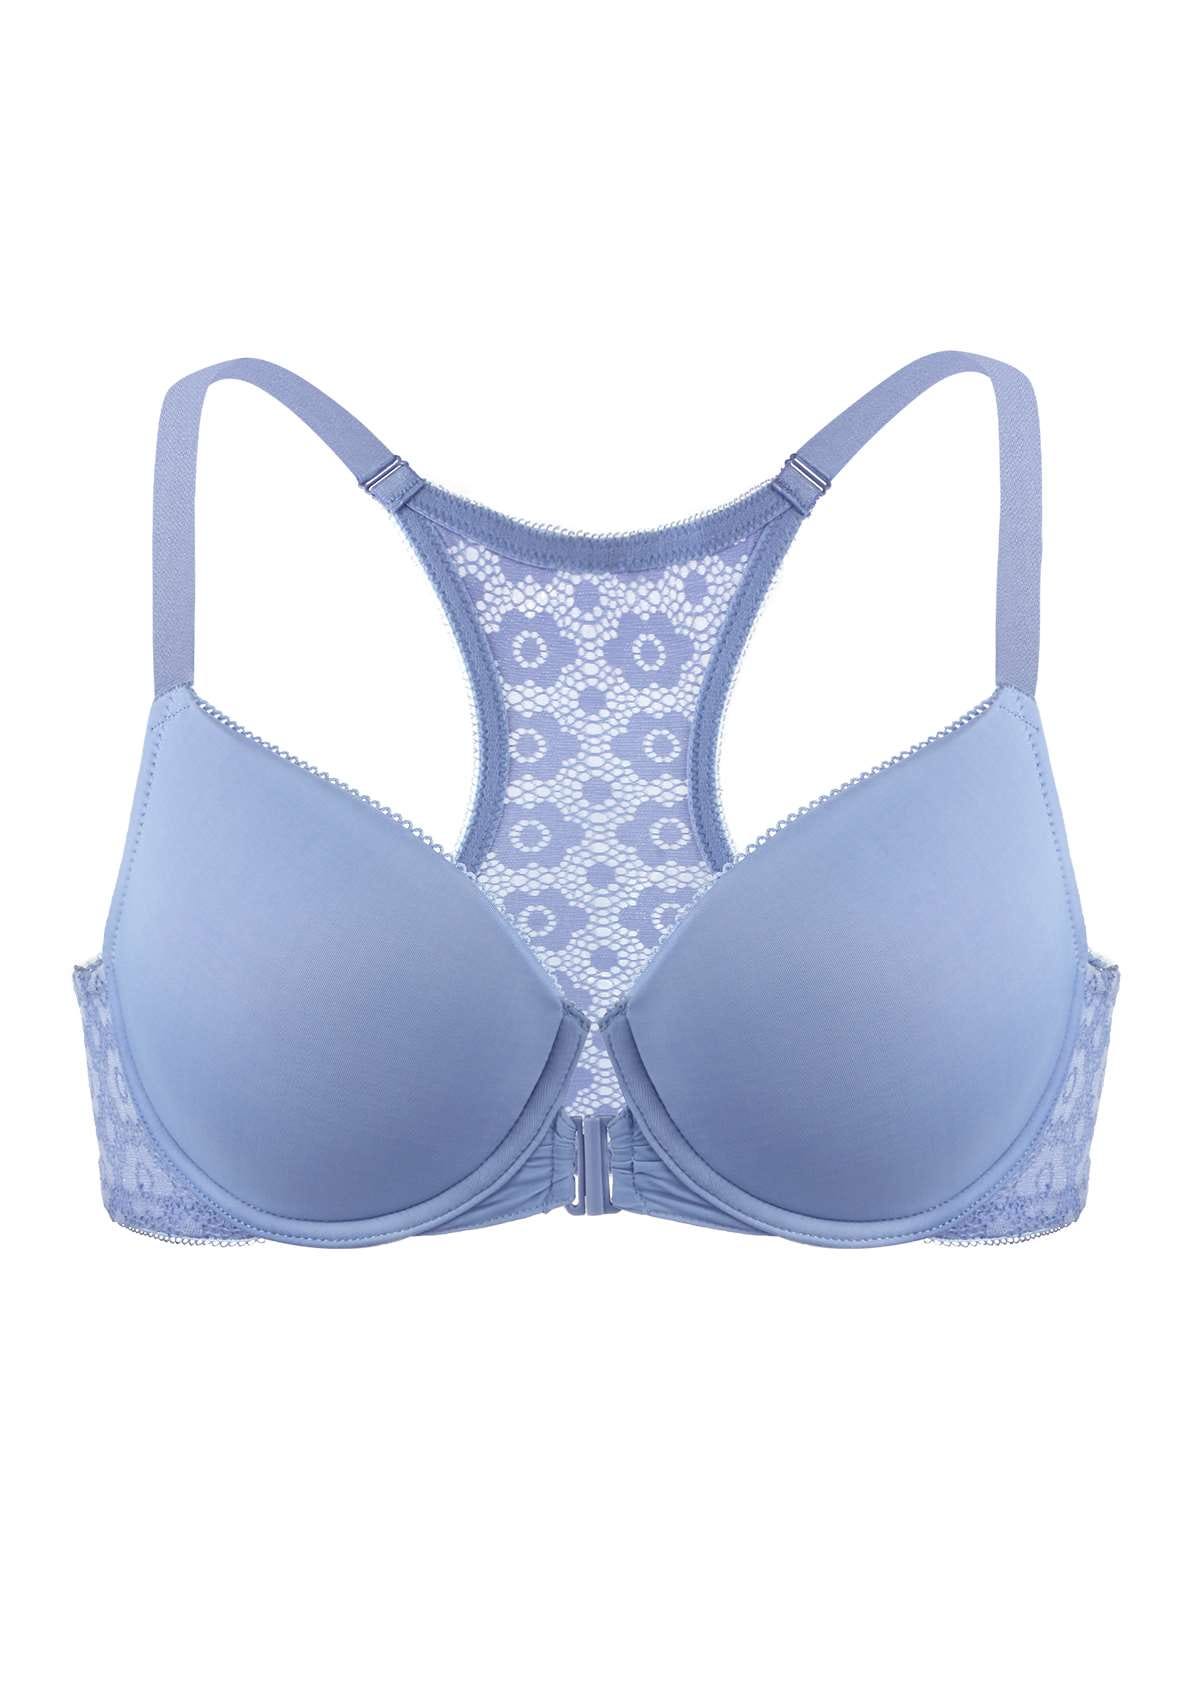 Bras for Narrow Shoulders: Finding Styles that Stay in Place, by Hsia  Lingerie